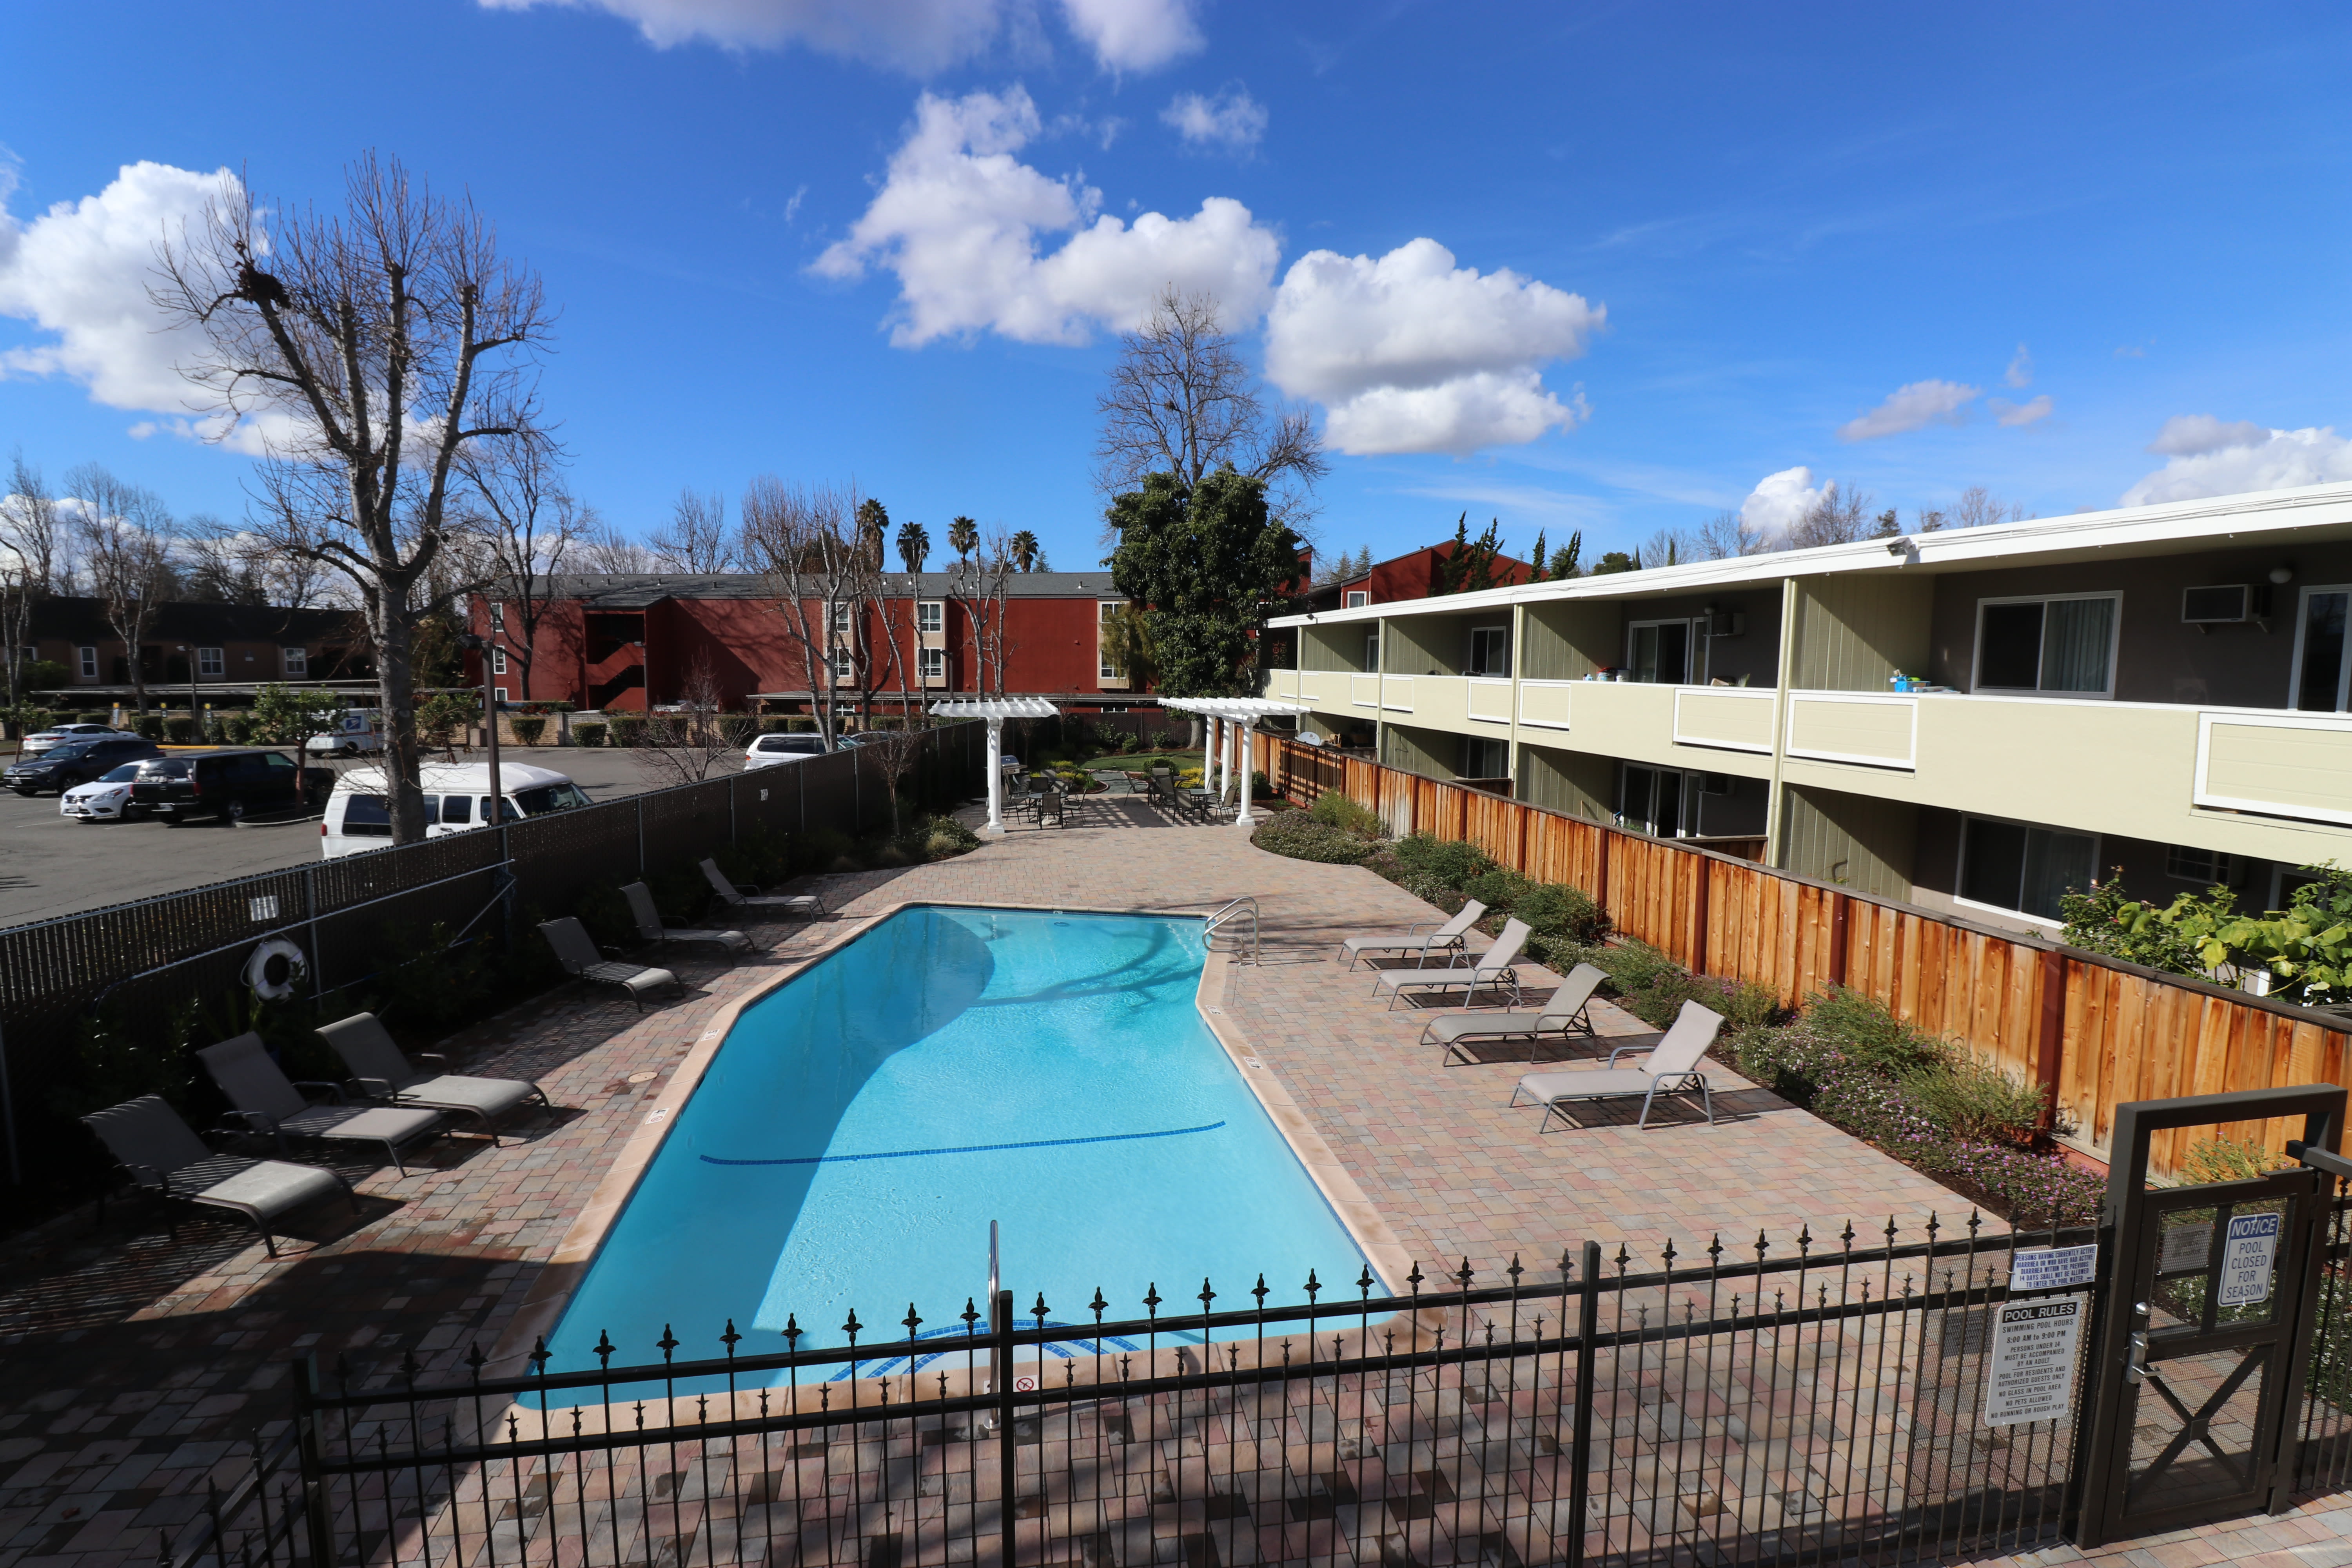 Chaise lounge chairs by the pool at Parkway Apartment Homes in Fremont, California